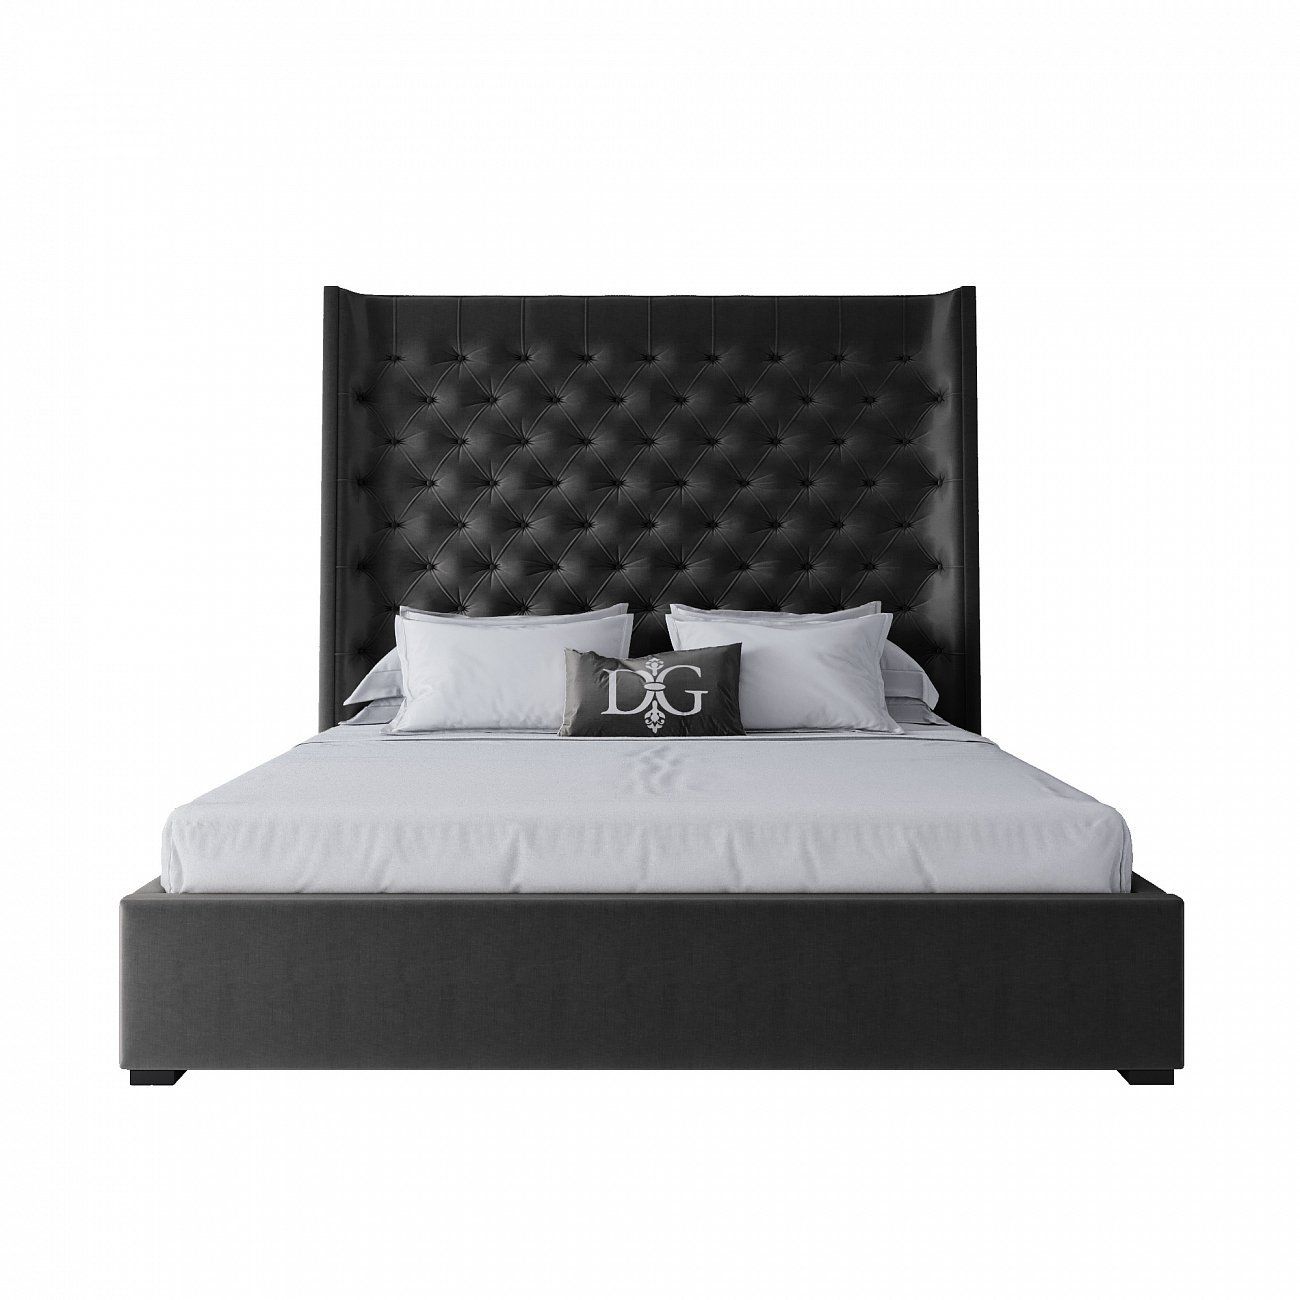 Double bed with upholstered headboard 180x200 cm black Jackie King